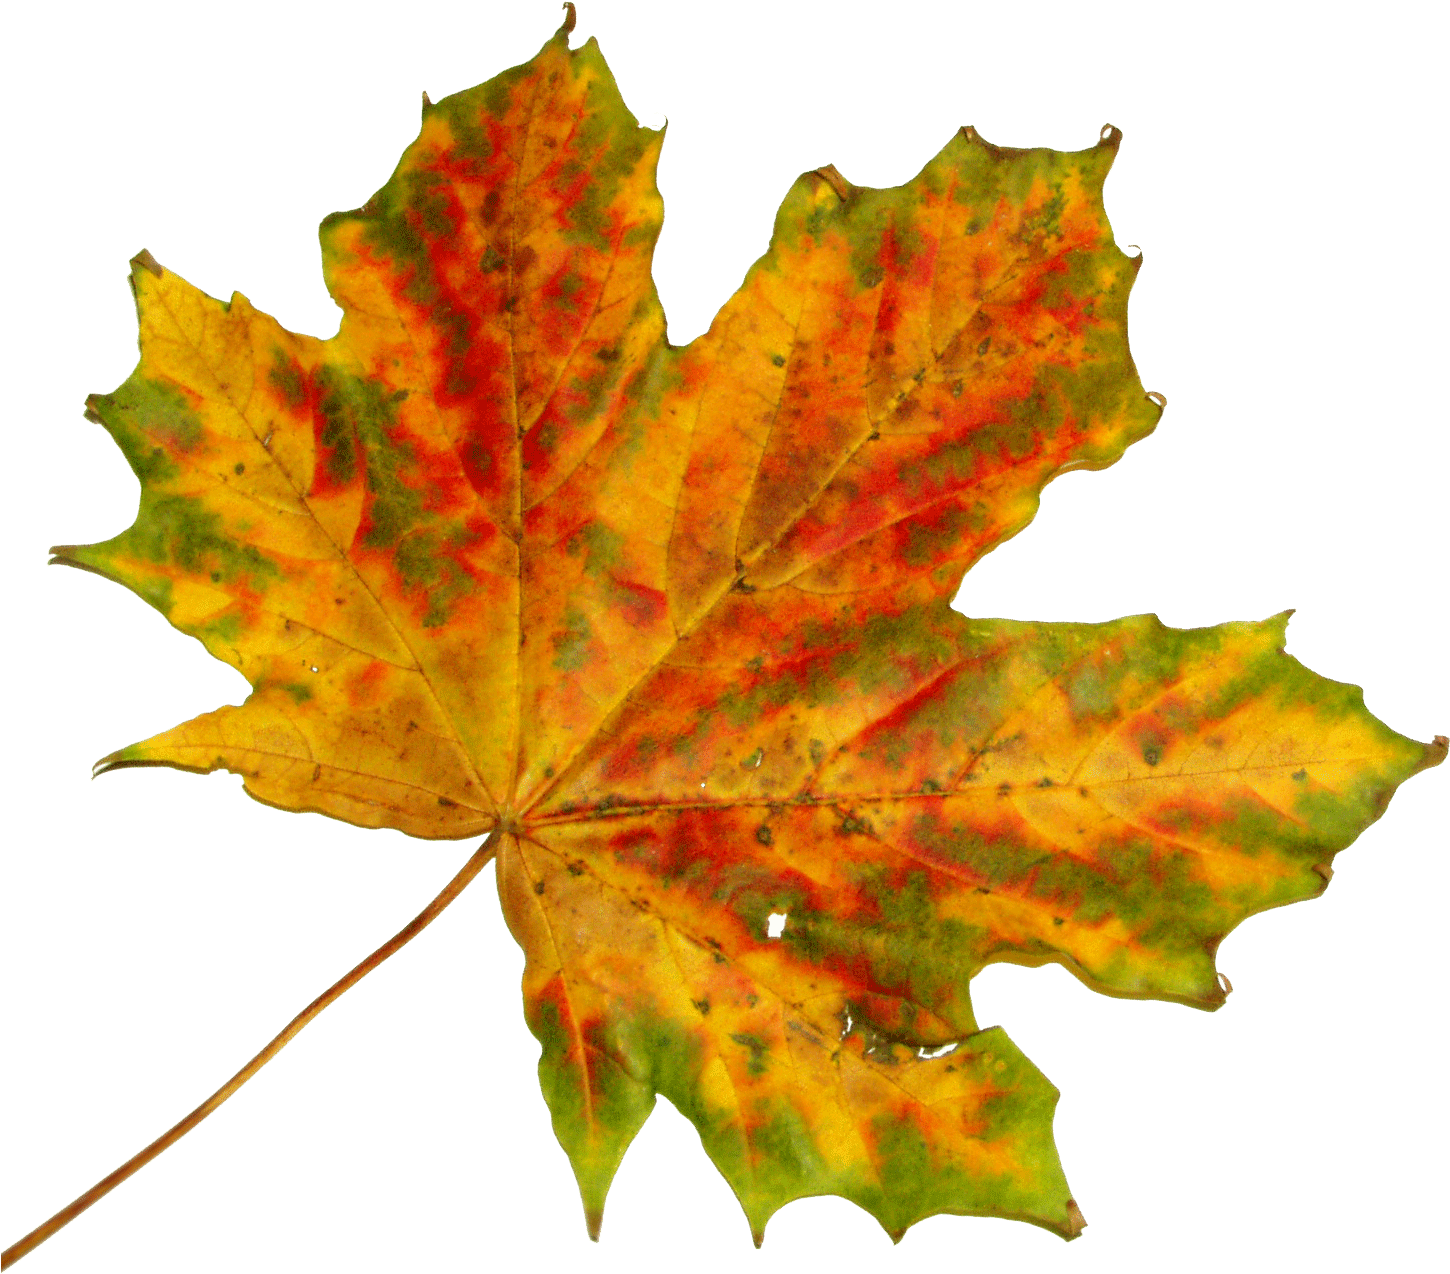 Free Vector Graphic - Fall Leaves To Cut Out (1458x1273)